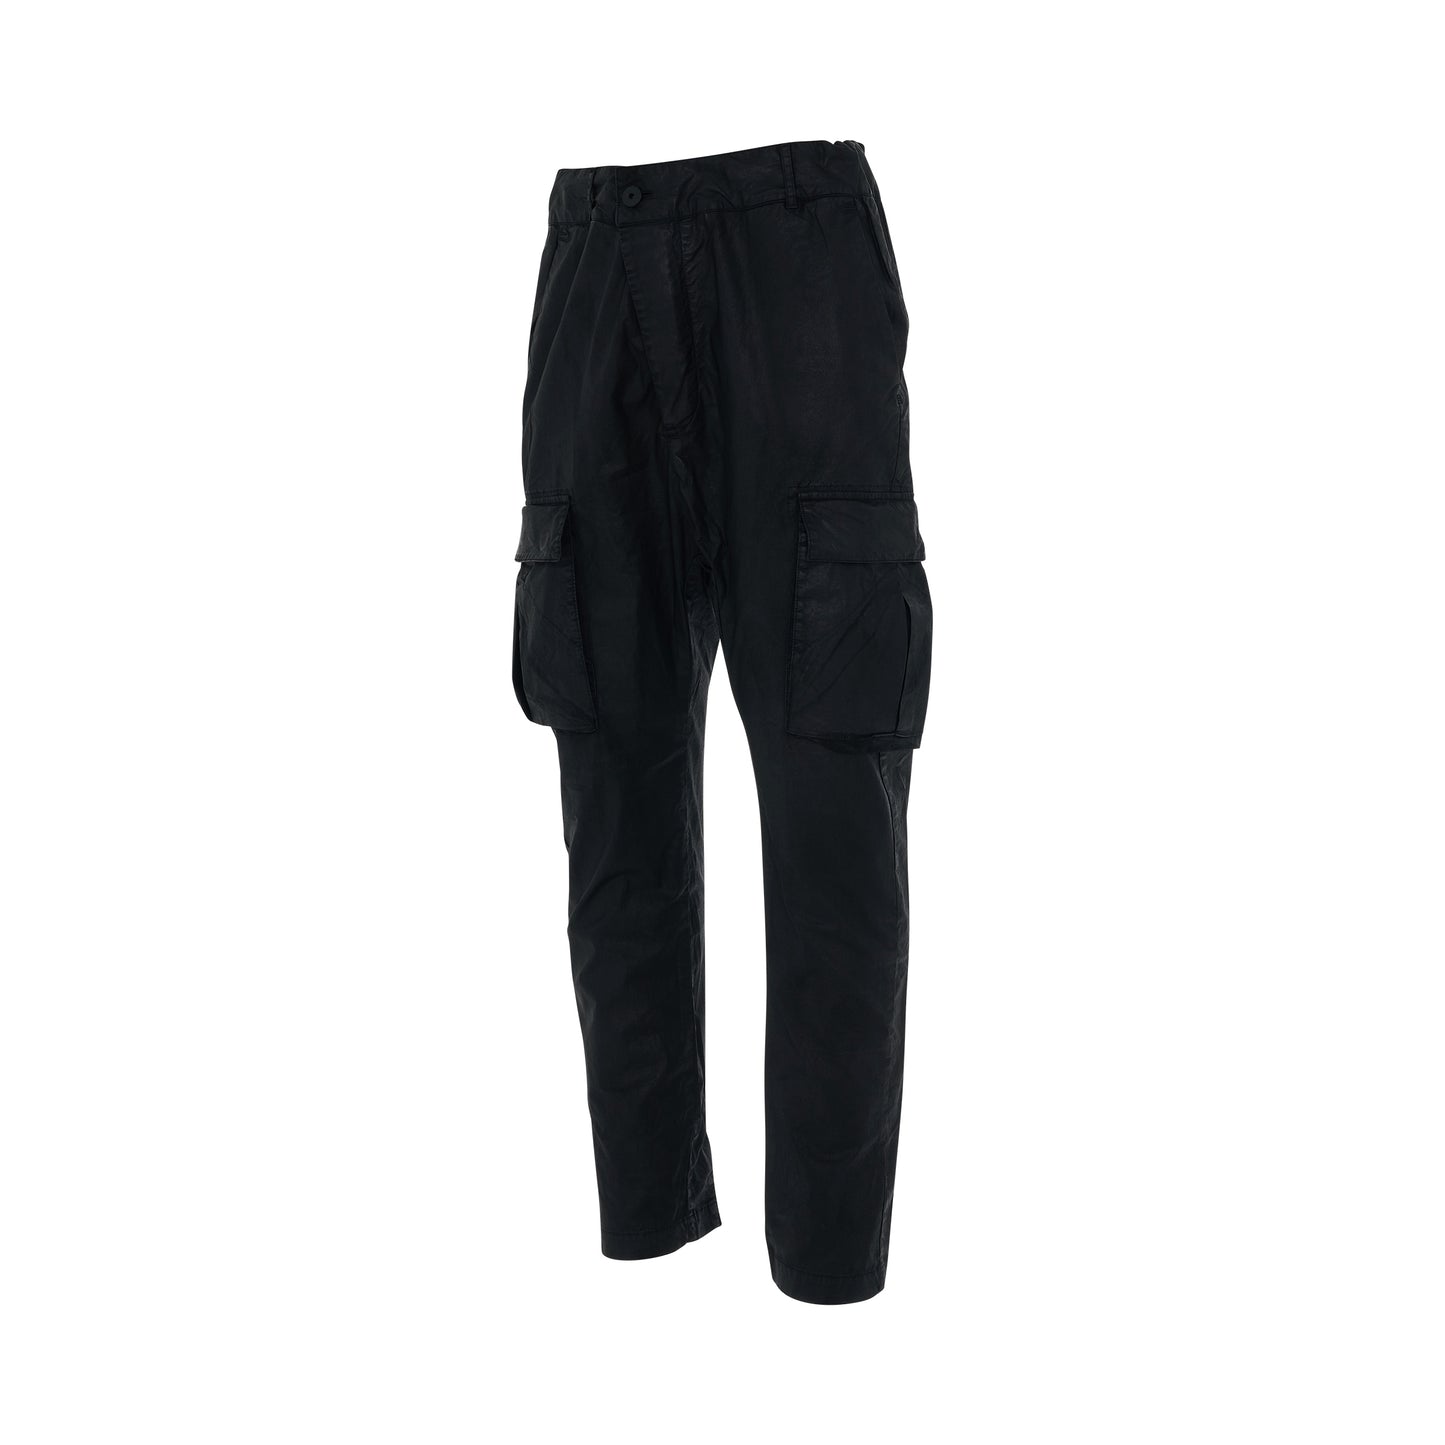 11 by BBS Side Pocket Casual Pant in Black